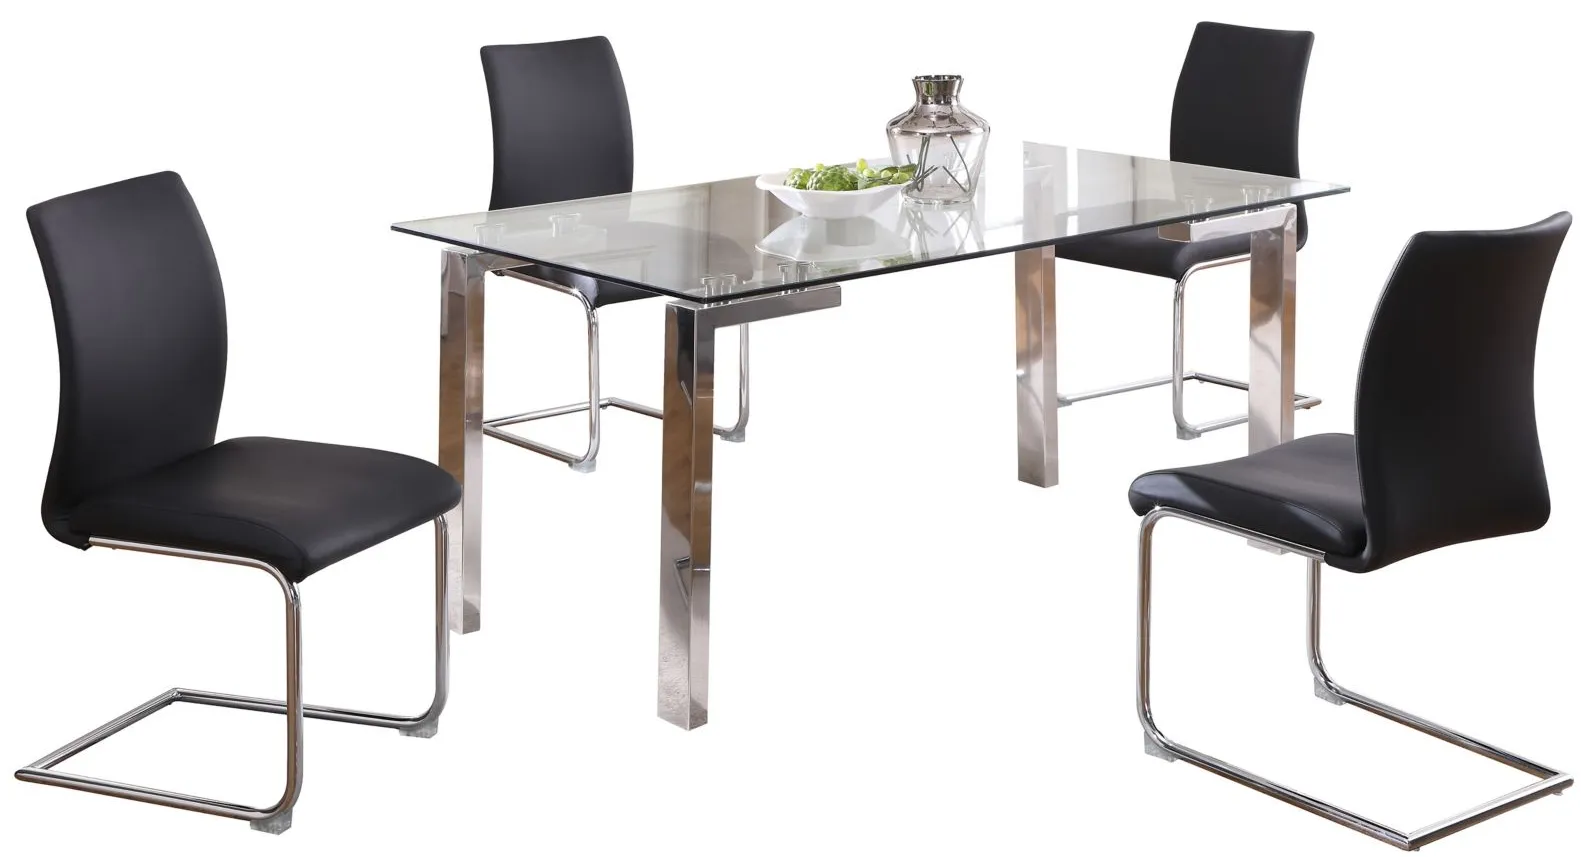 Cristina 5-pc. Glass Dining Set in Black by Chintaly Imports